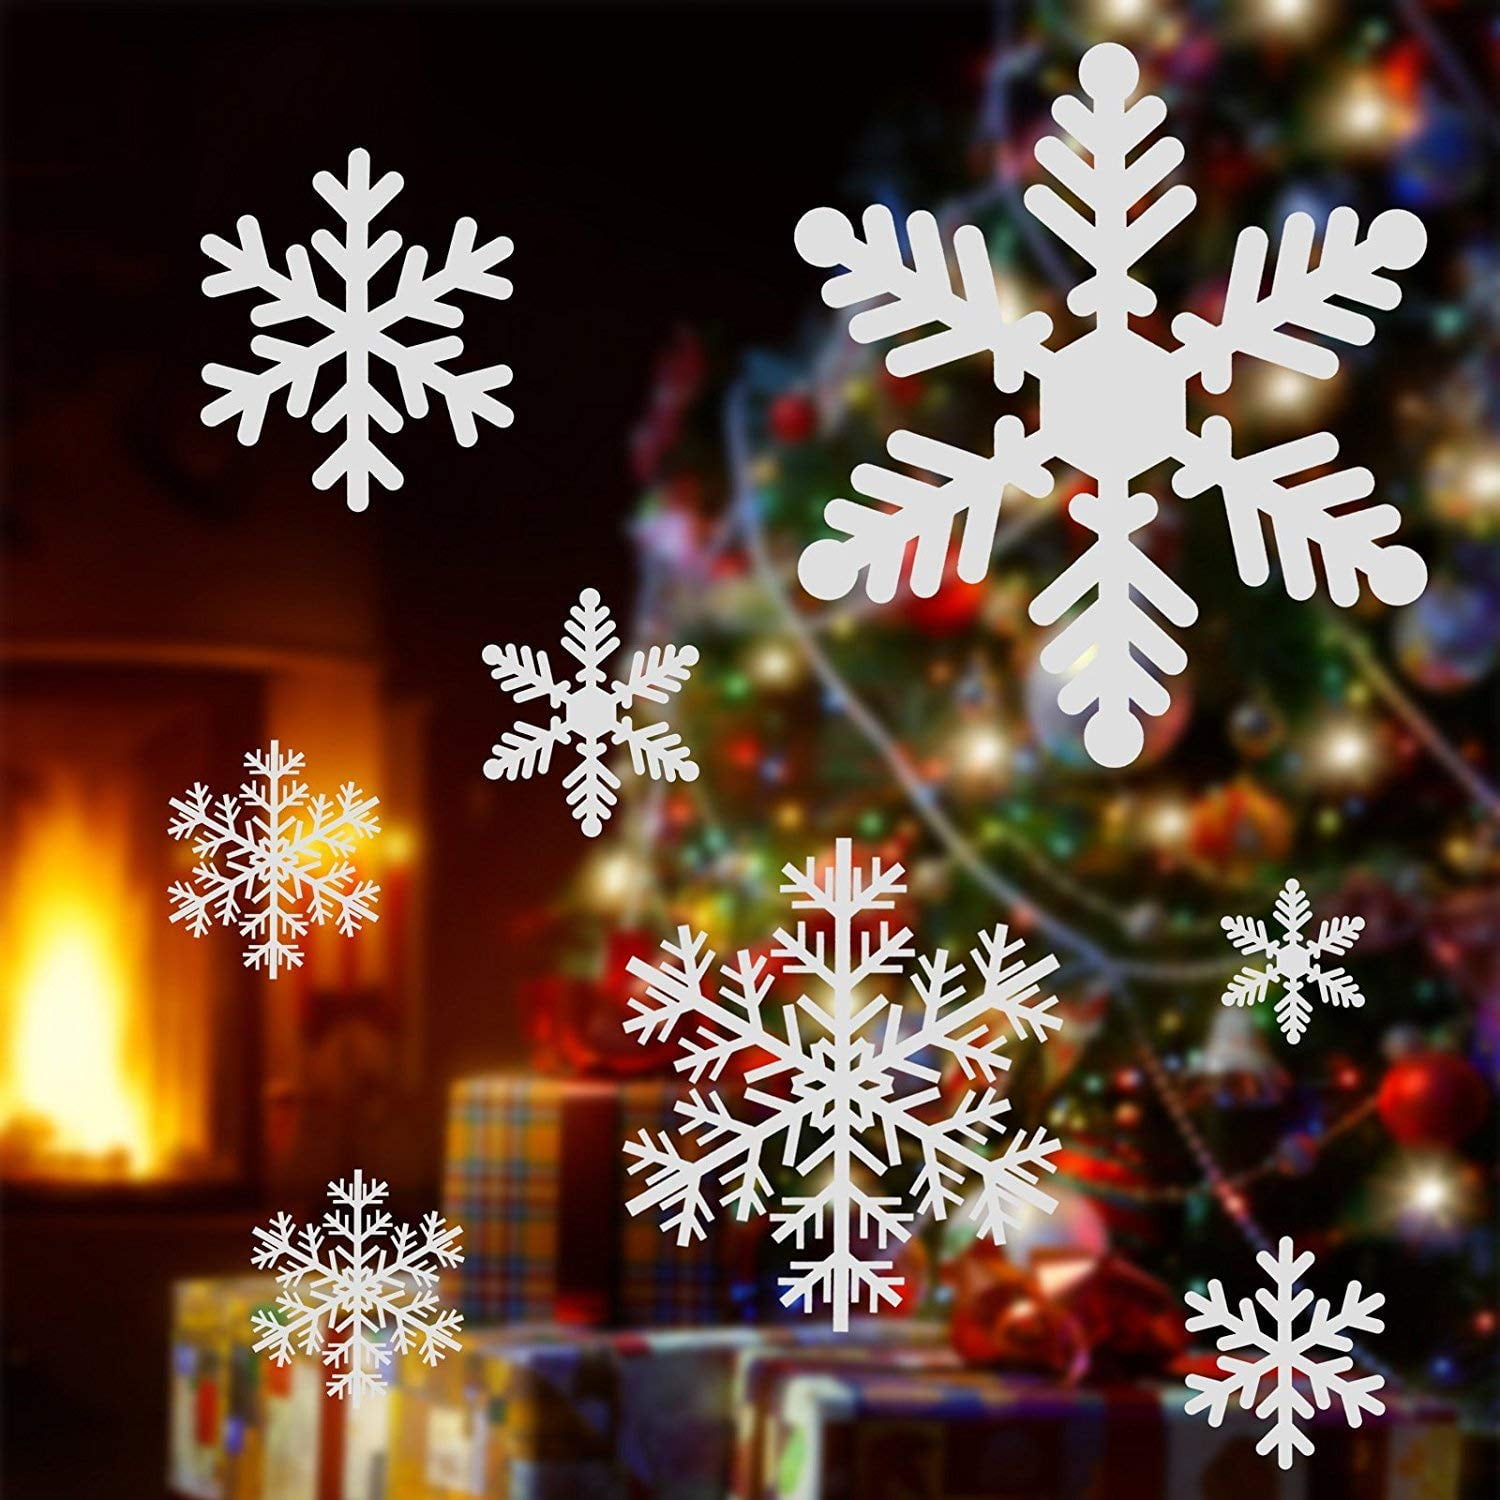 Snowflakes Window Stickers Wall CHRISTMAS winter DECORATIONS 